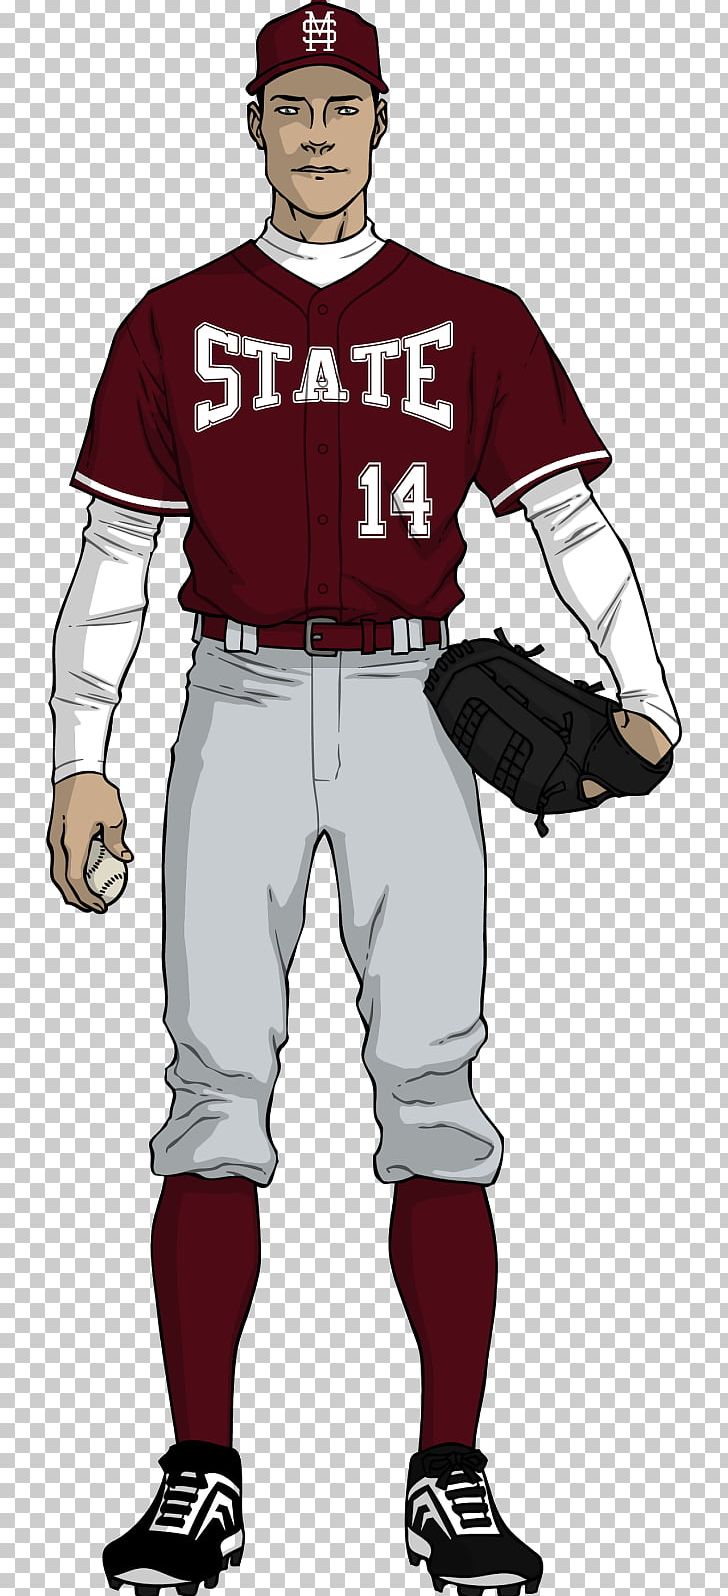 Mississippi State Bulldogs Baseball Ole Miss Rebels Baseball Mississippi State Bulldogs Football Mississippi State University T-shirt PNG, Clipart, Ball Game, Baseball Uniform, Fictional Character, Jersey, Missis Free PNG Download